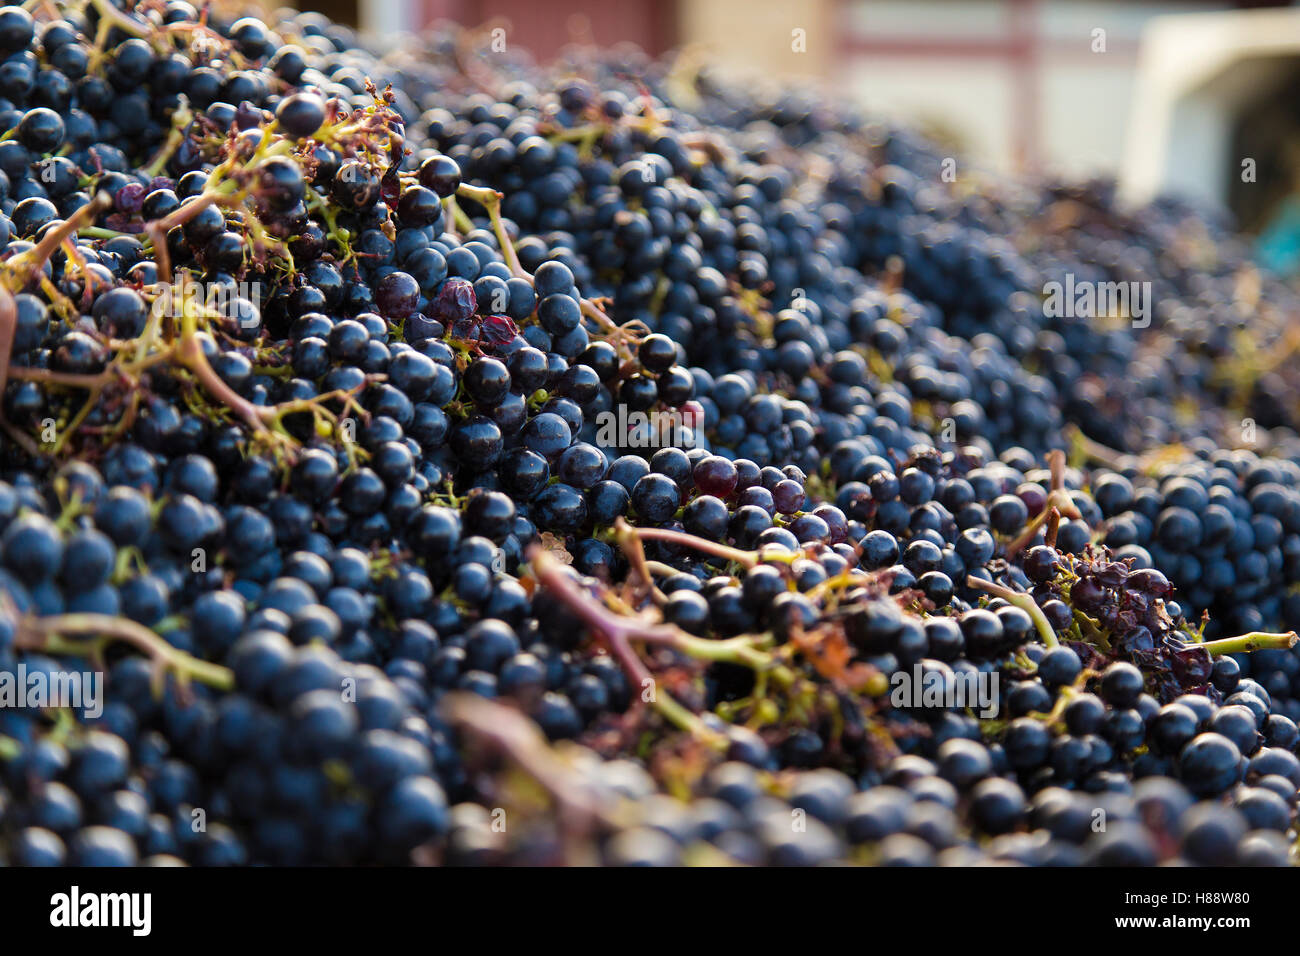 Close up of pile of Malbec grapes in Saint Emilion ready for pressing ripe bunches of grapes stalks just picked at wine harvest Stock Photo